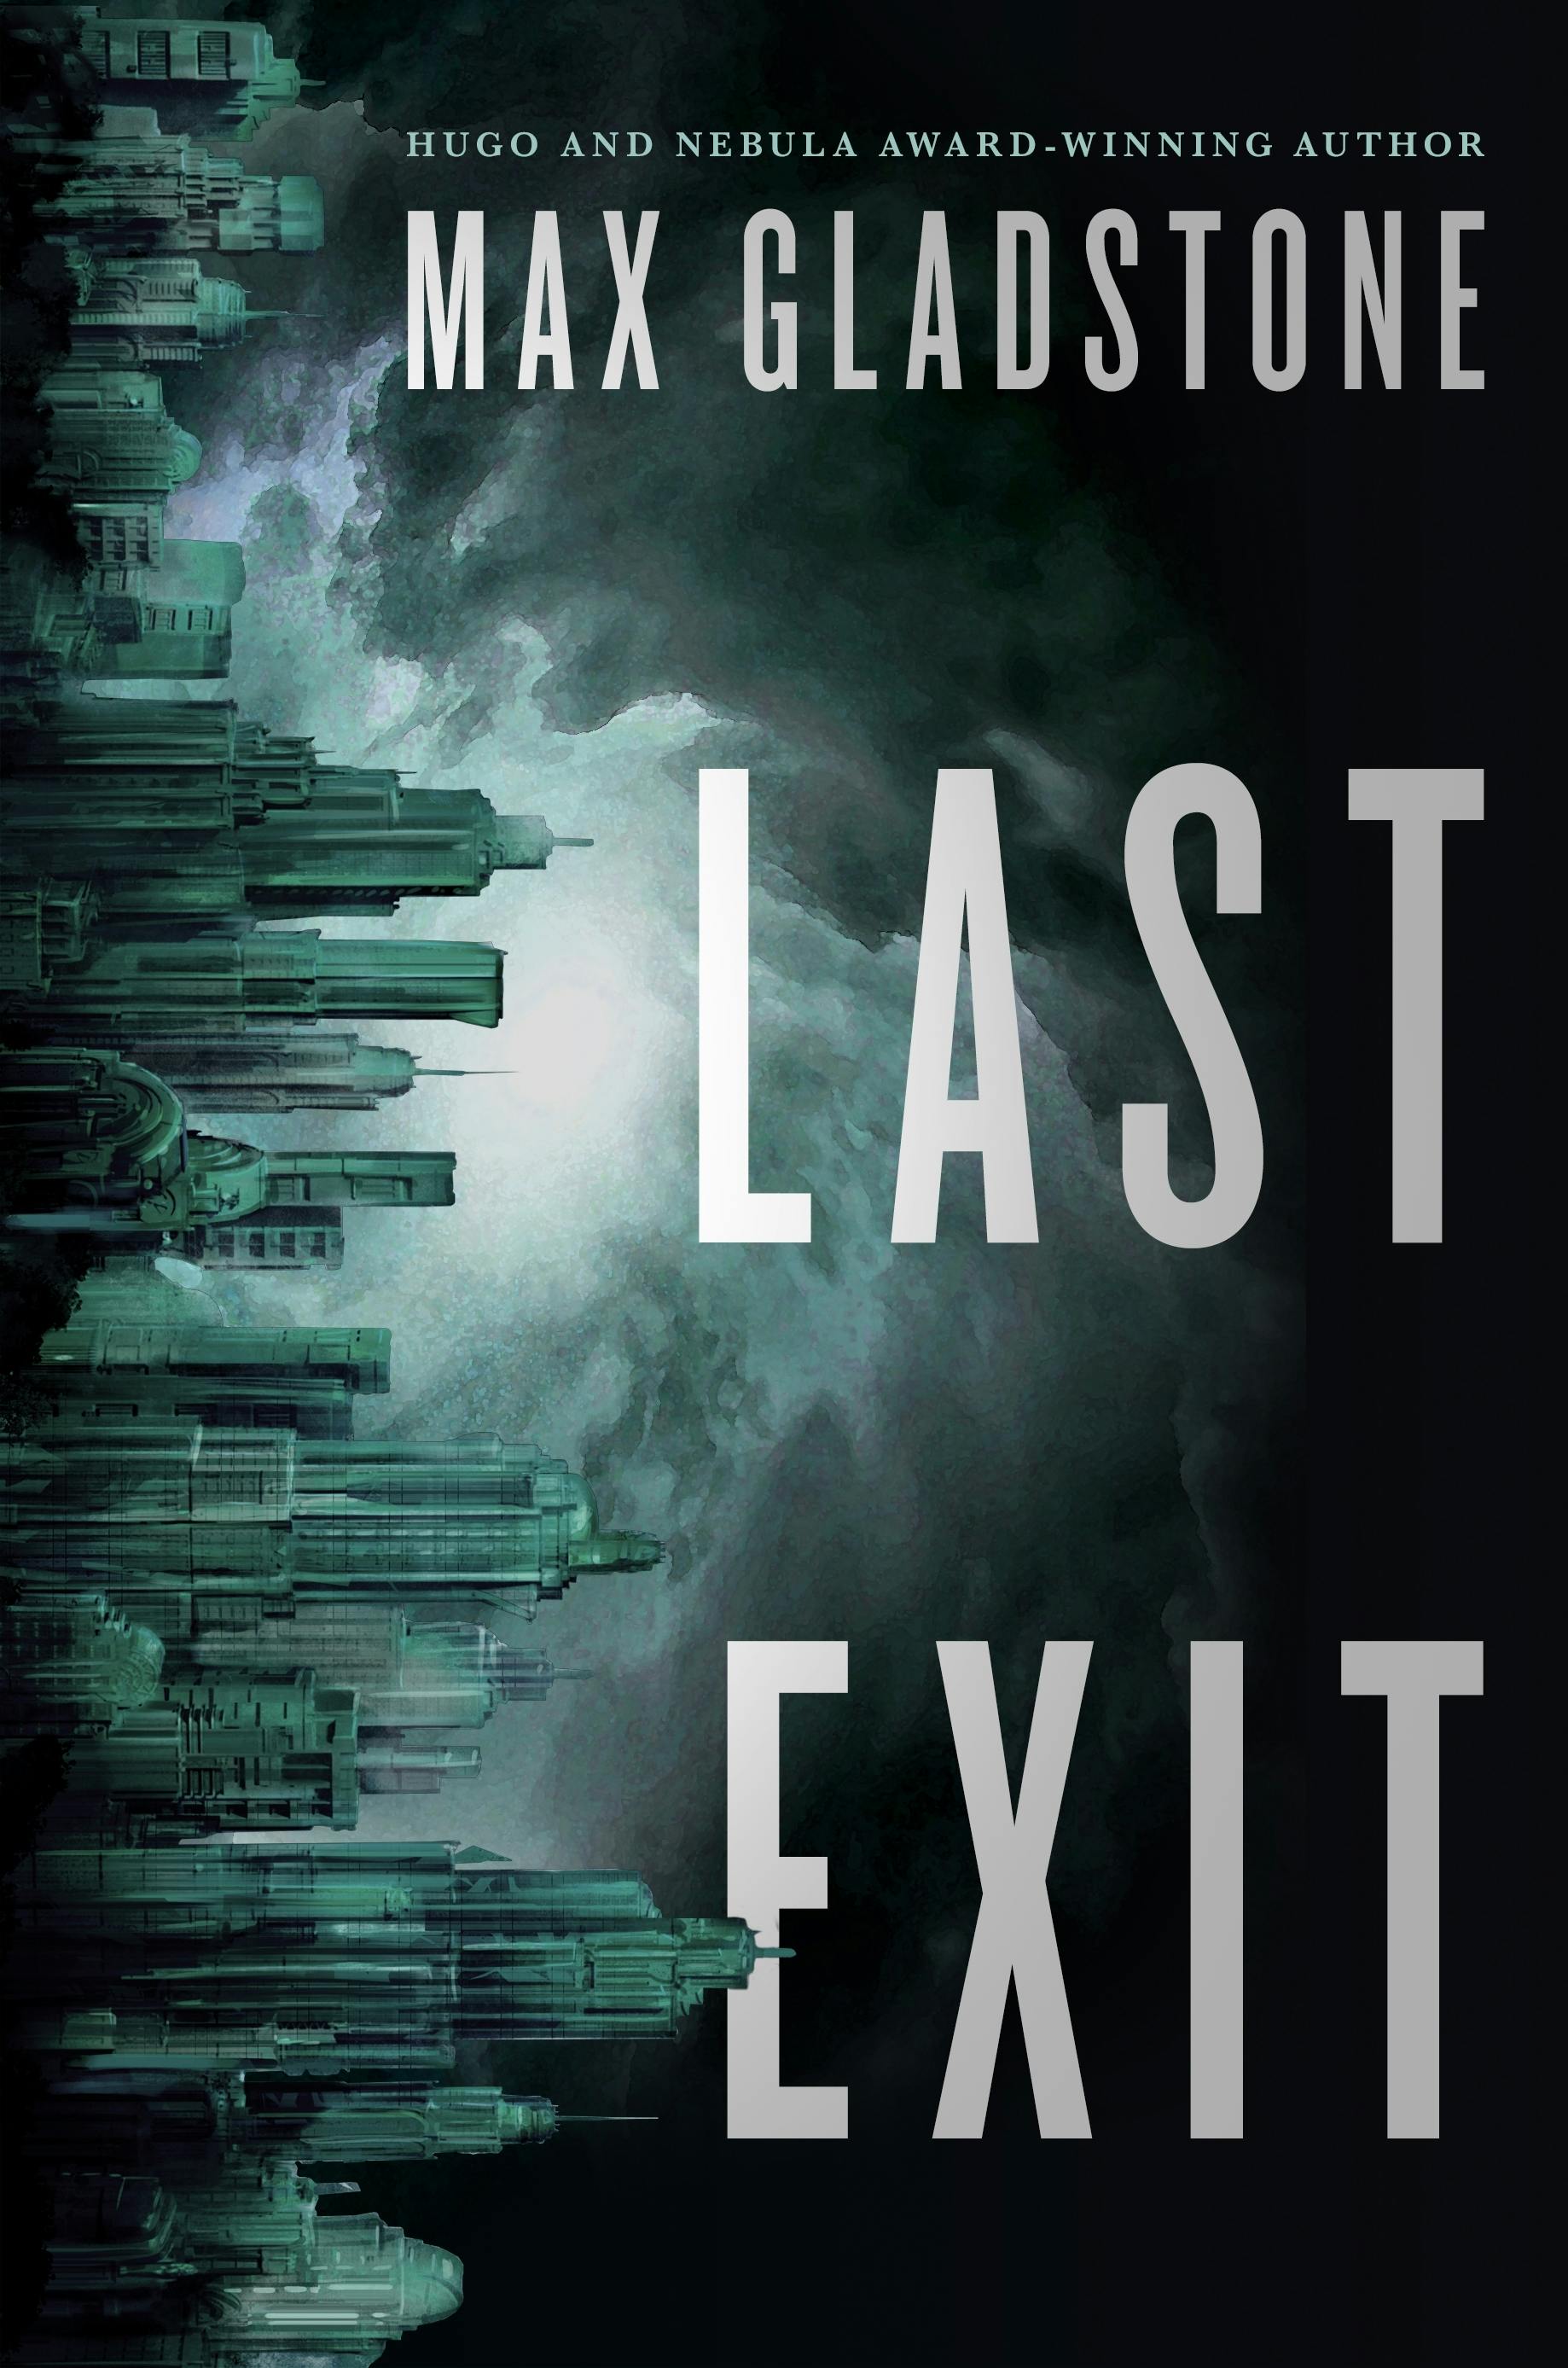 Cover for the book titled as: Last Exit